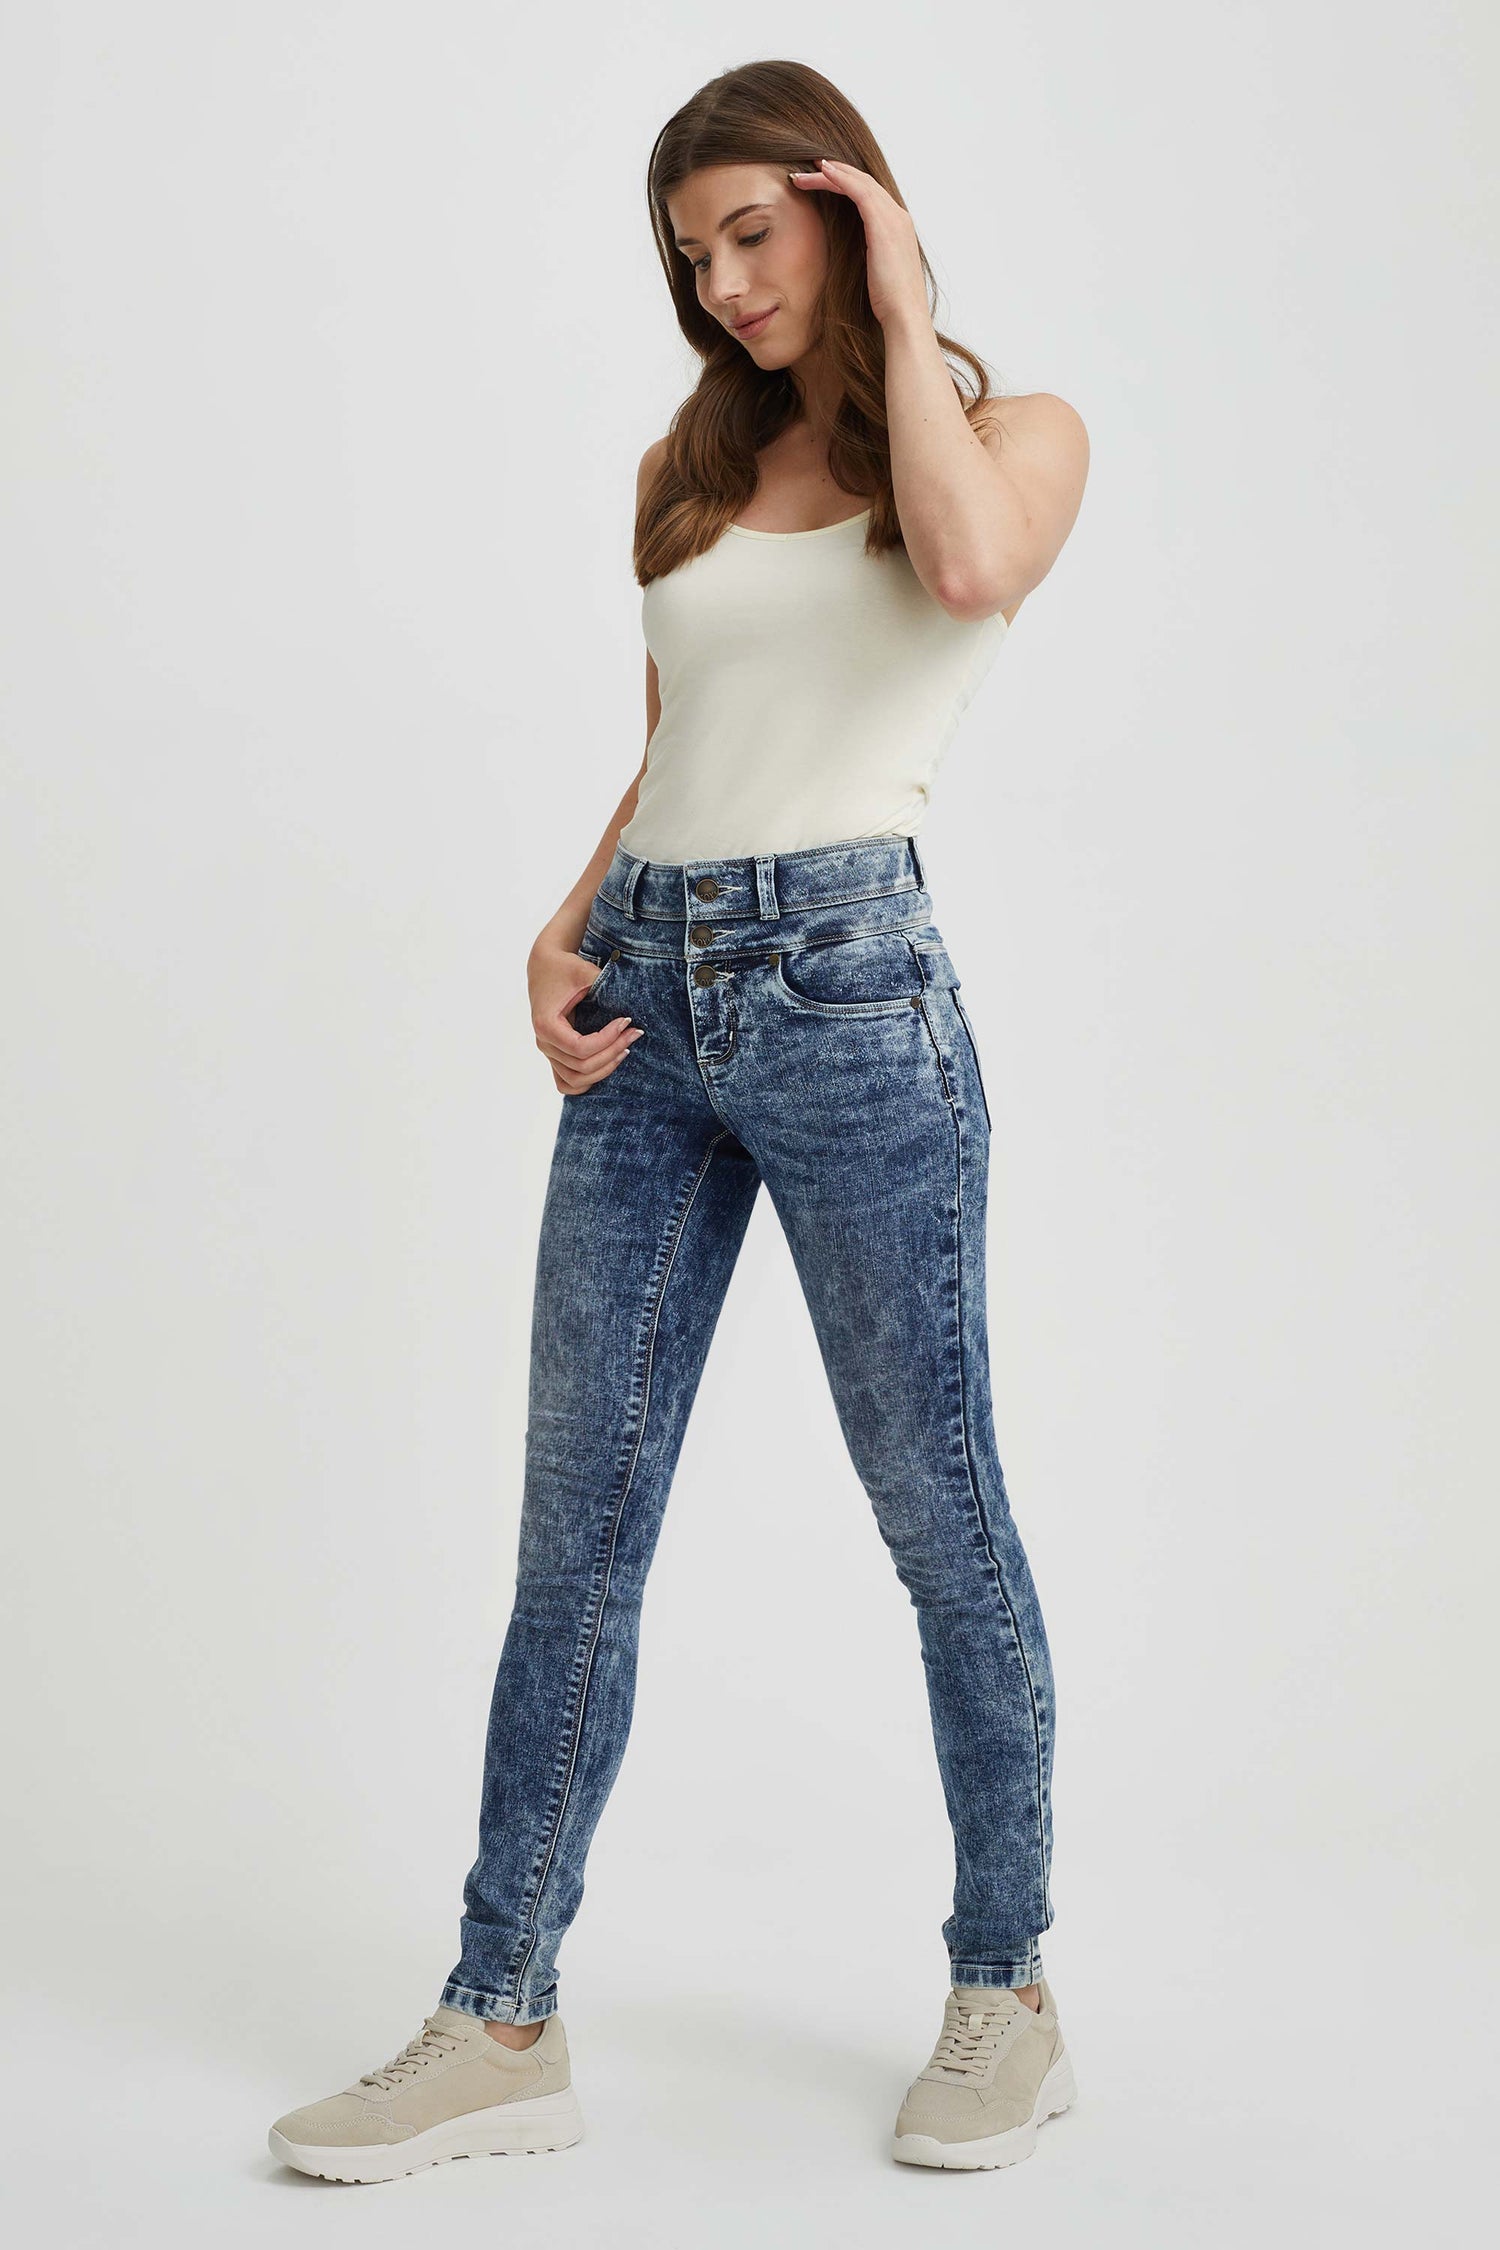 lulu womens pants - OFF-58% >Free Delivery